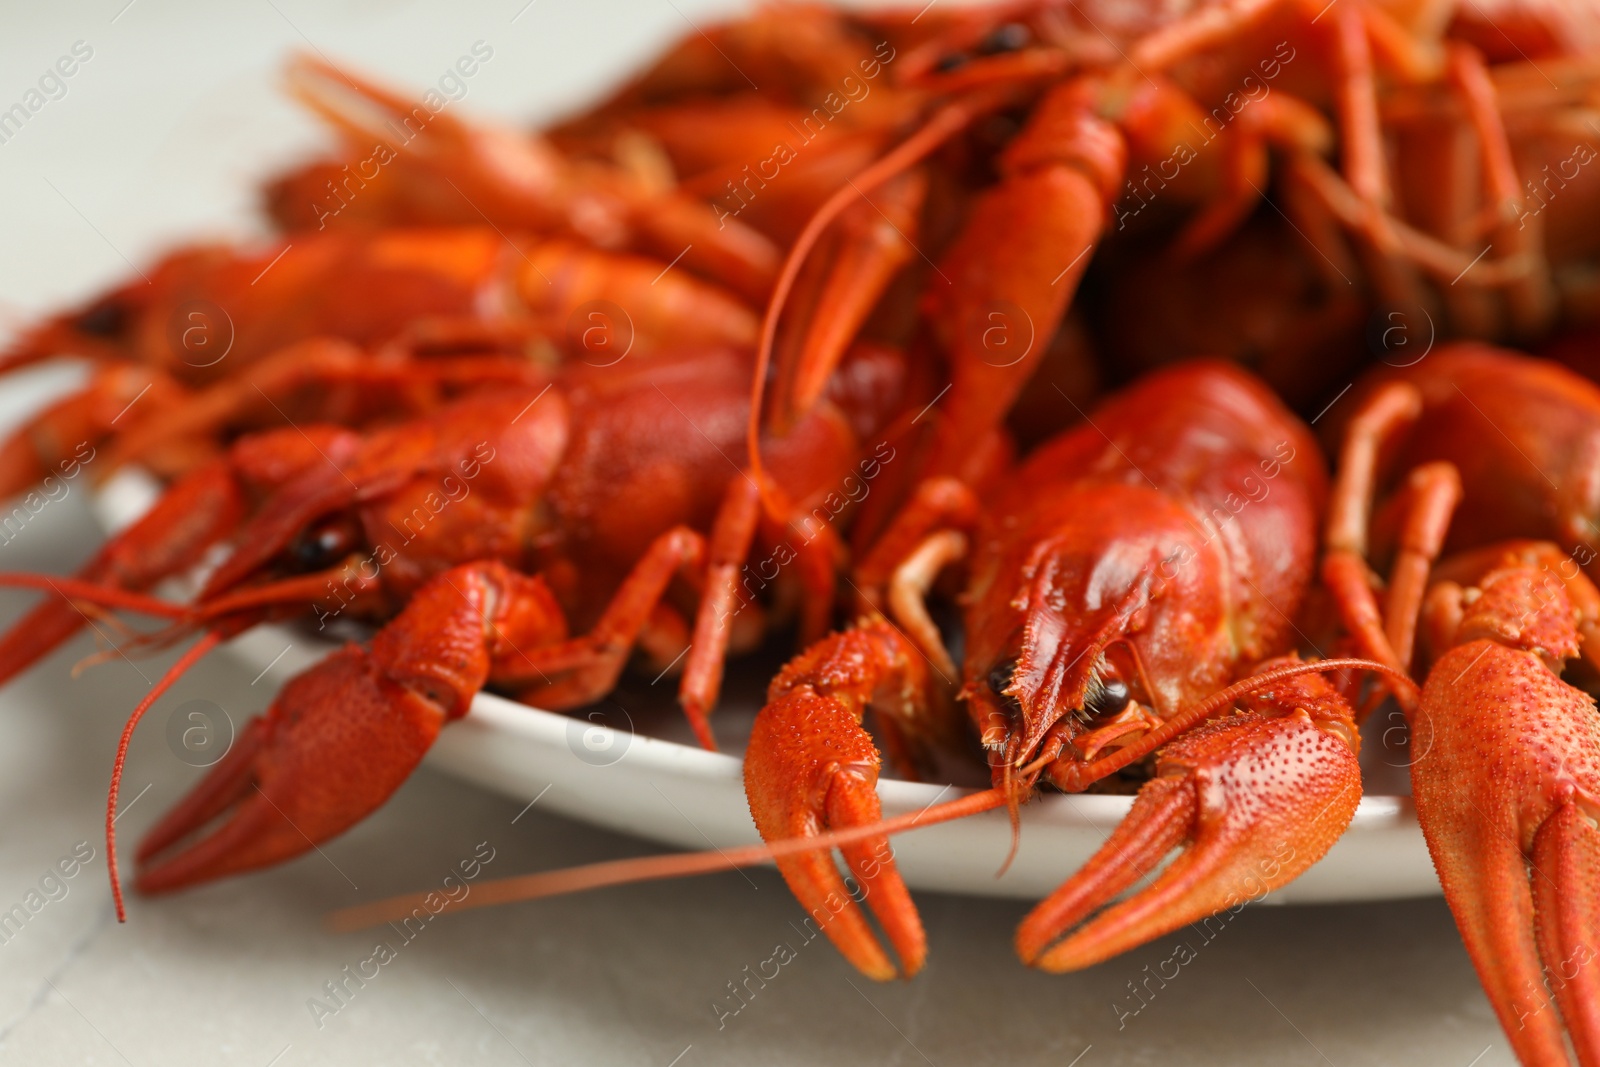 Photo of Delicious boiled crayfishes in plate, closeup view